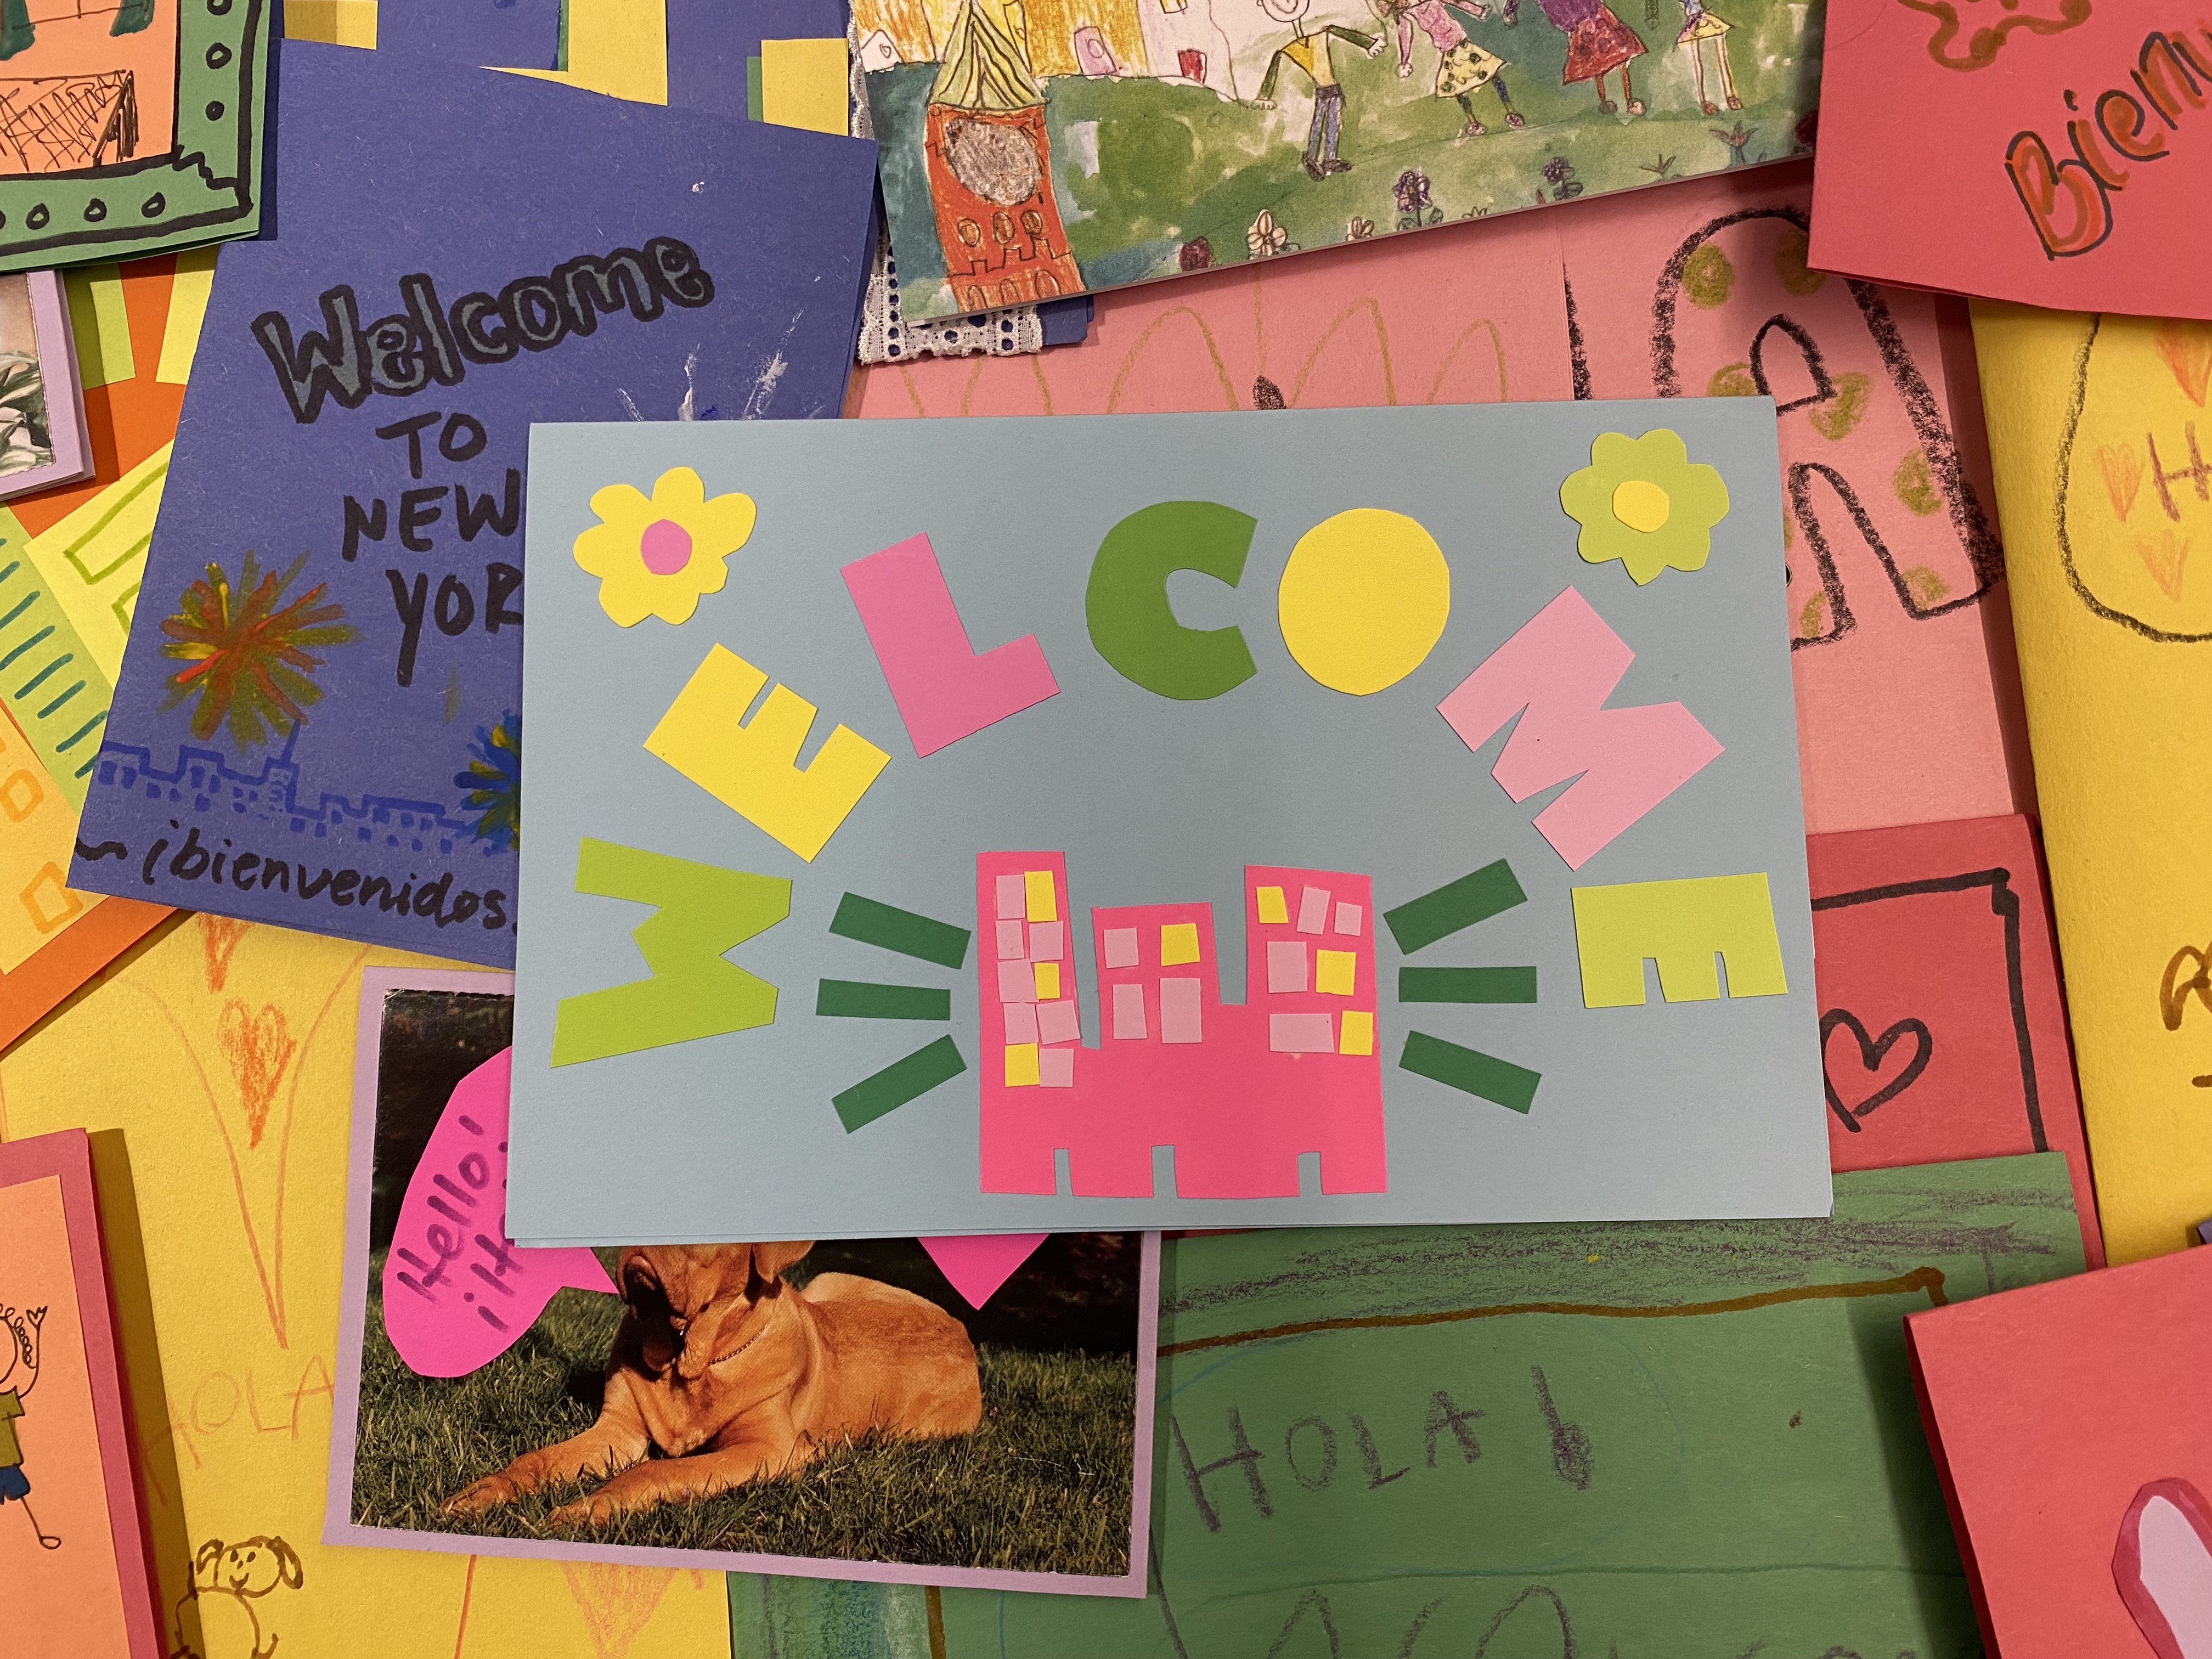 Members created more than 200 welcome cards to welcome new neighbors at a family shelter in Midtown.